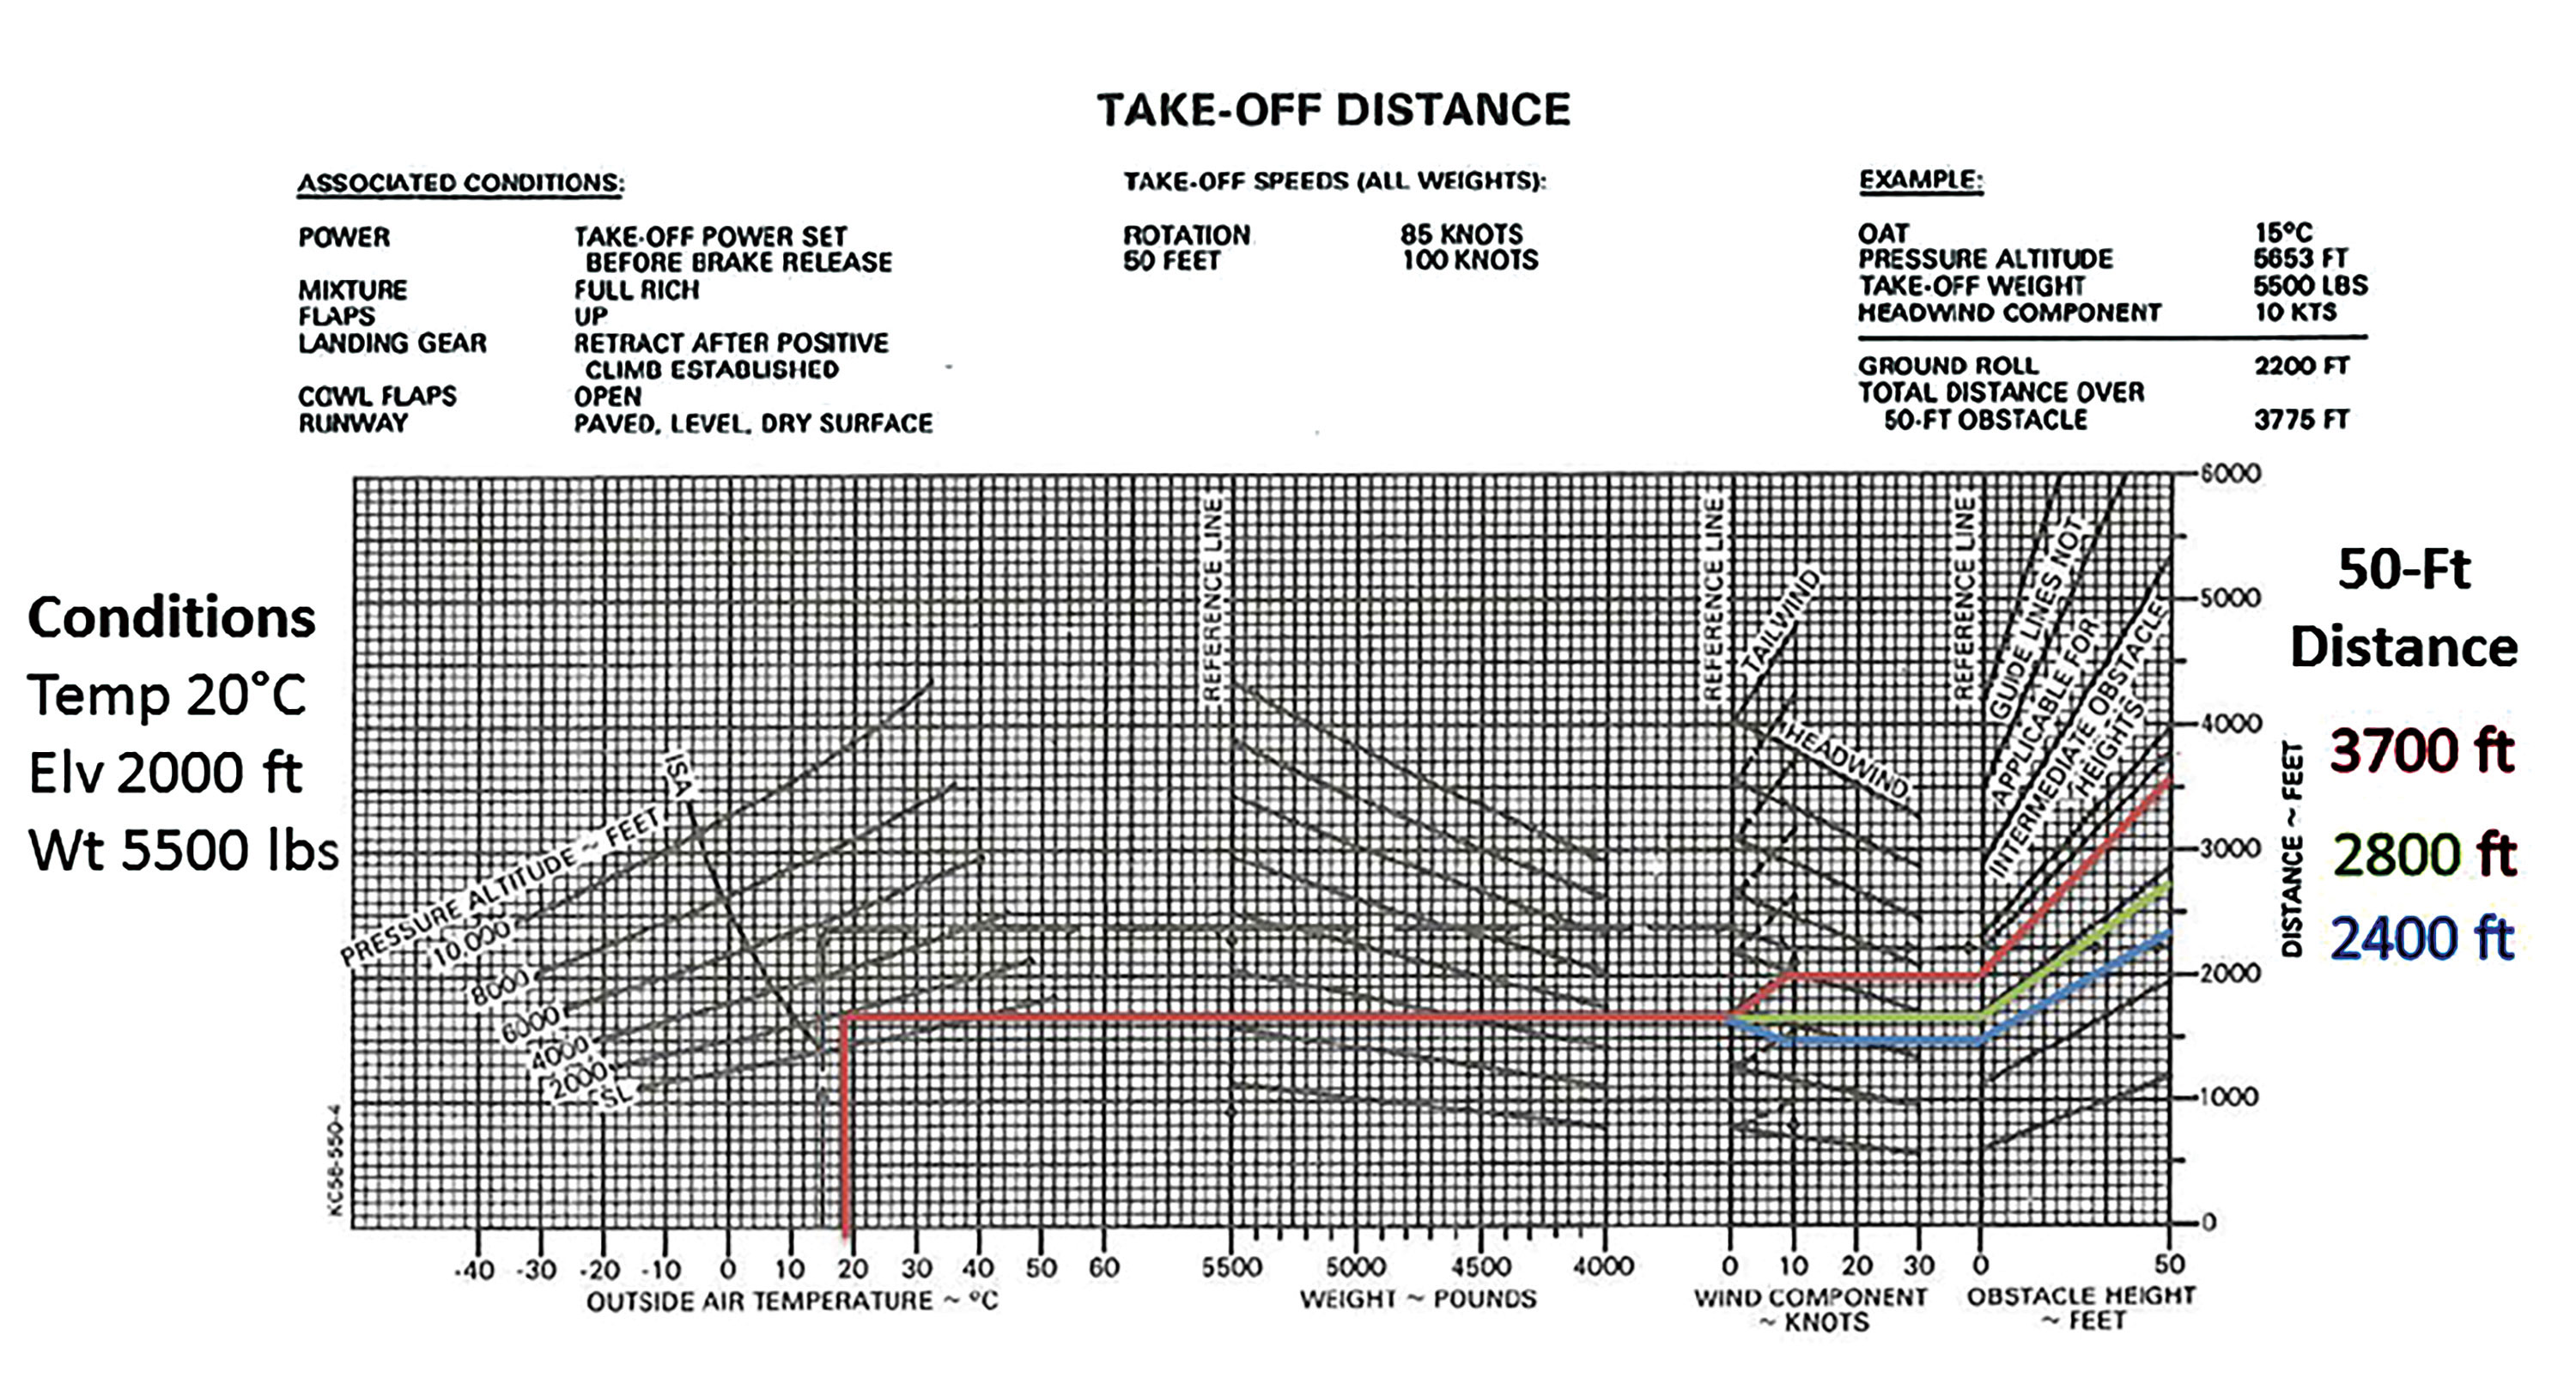 Tailwind Component Chart